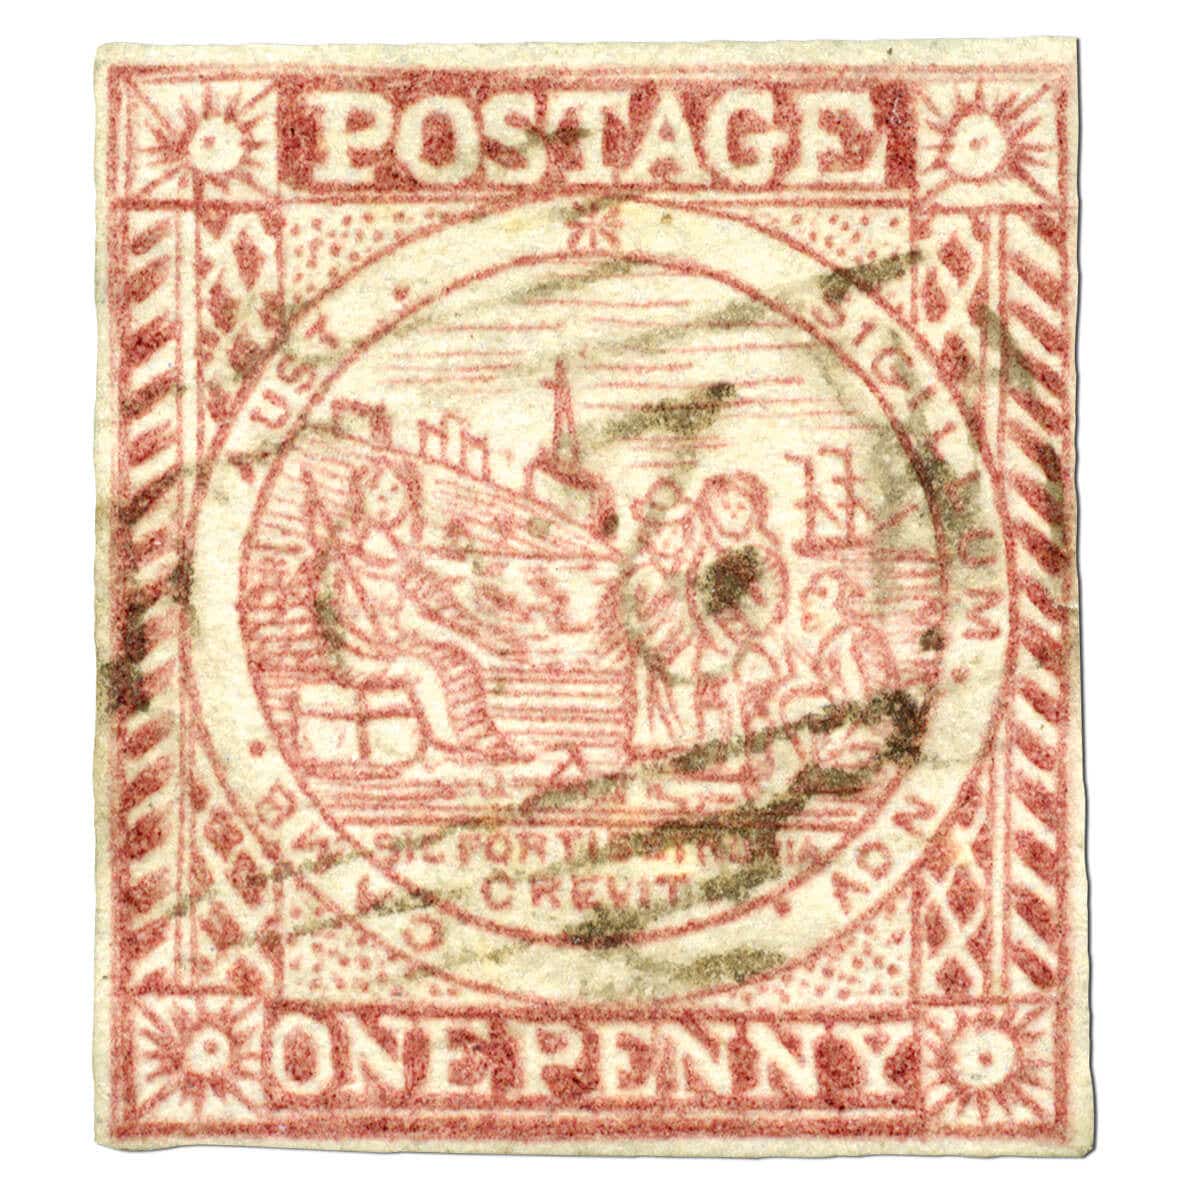 1850 NSW 1d Red Sydney View FINE USED